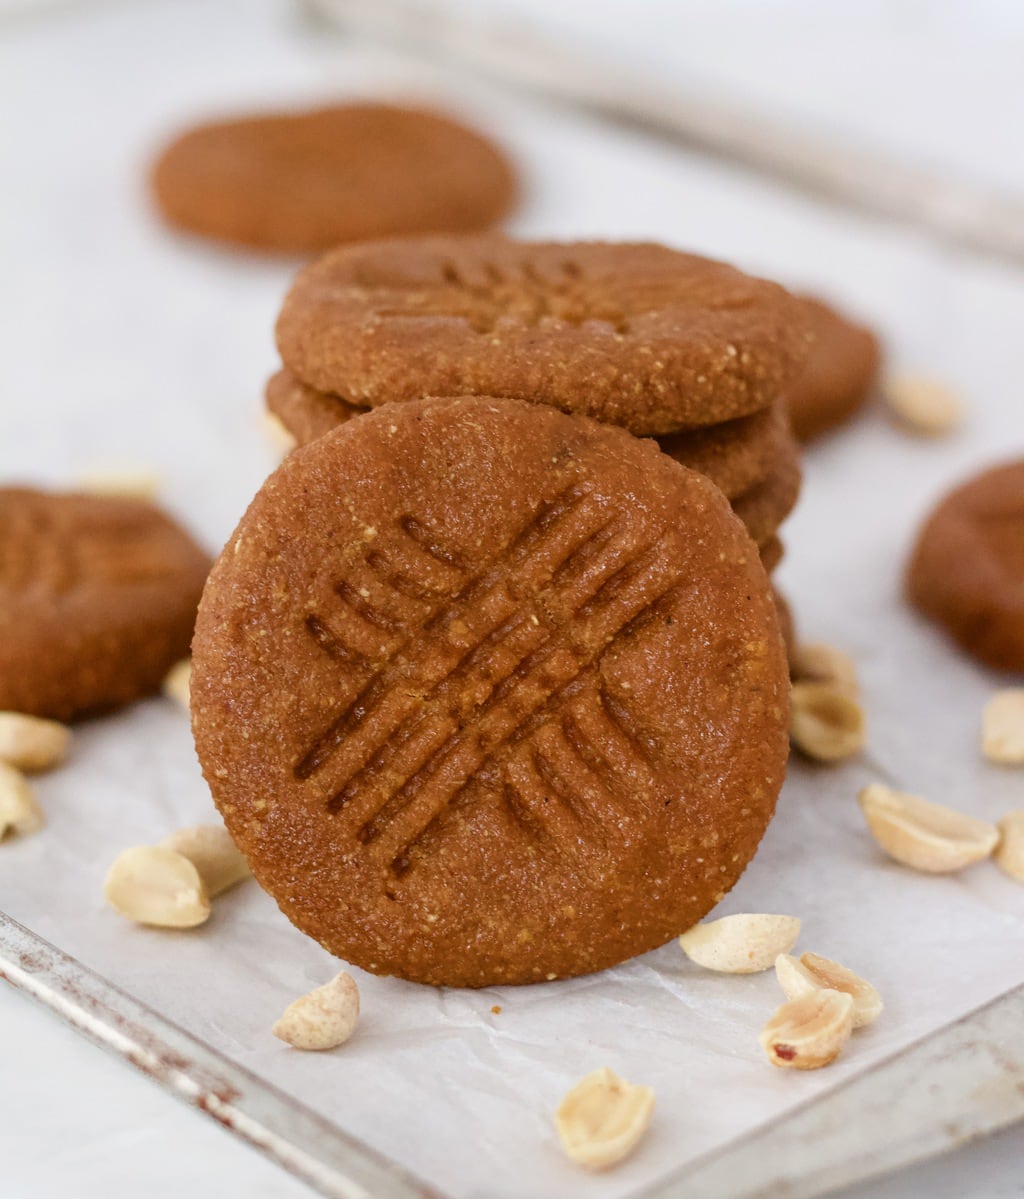 These soft & chewy Keto Vegan Peanut Butter Protein Cookies are the perfect, healthy dessert or snack! They're also  gluten-free, sugar-free, oil-free, low-fat, low-carb & low-calorie - only 30 calories each!